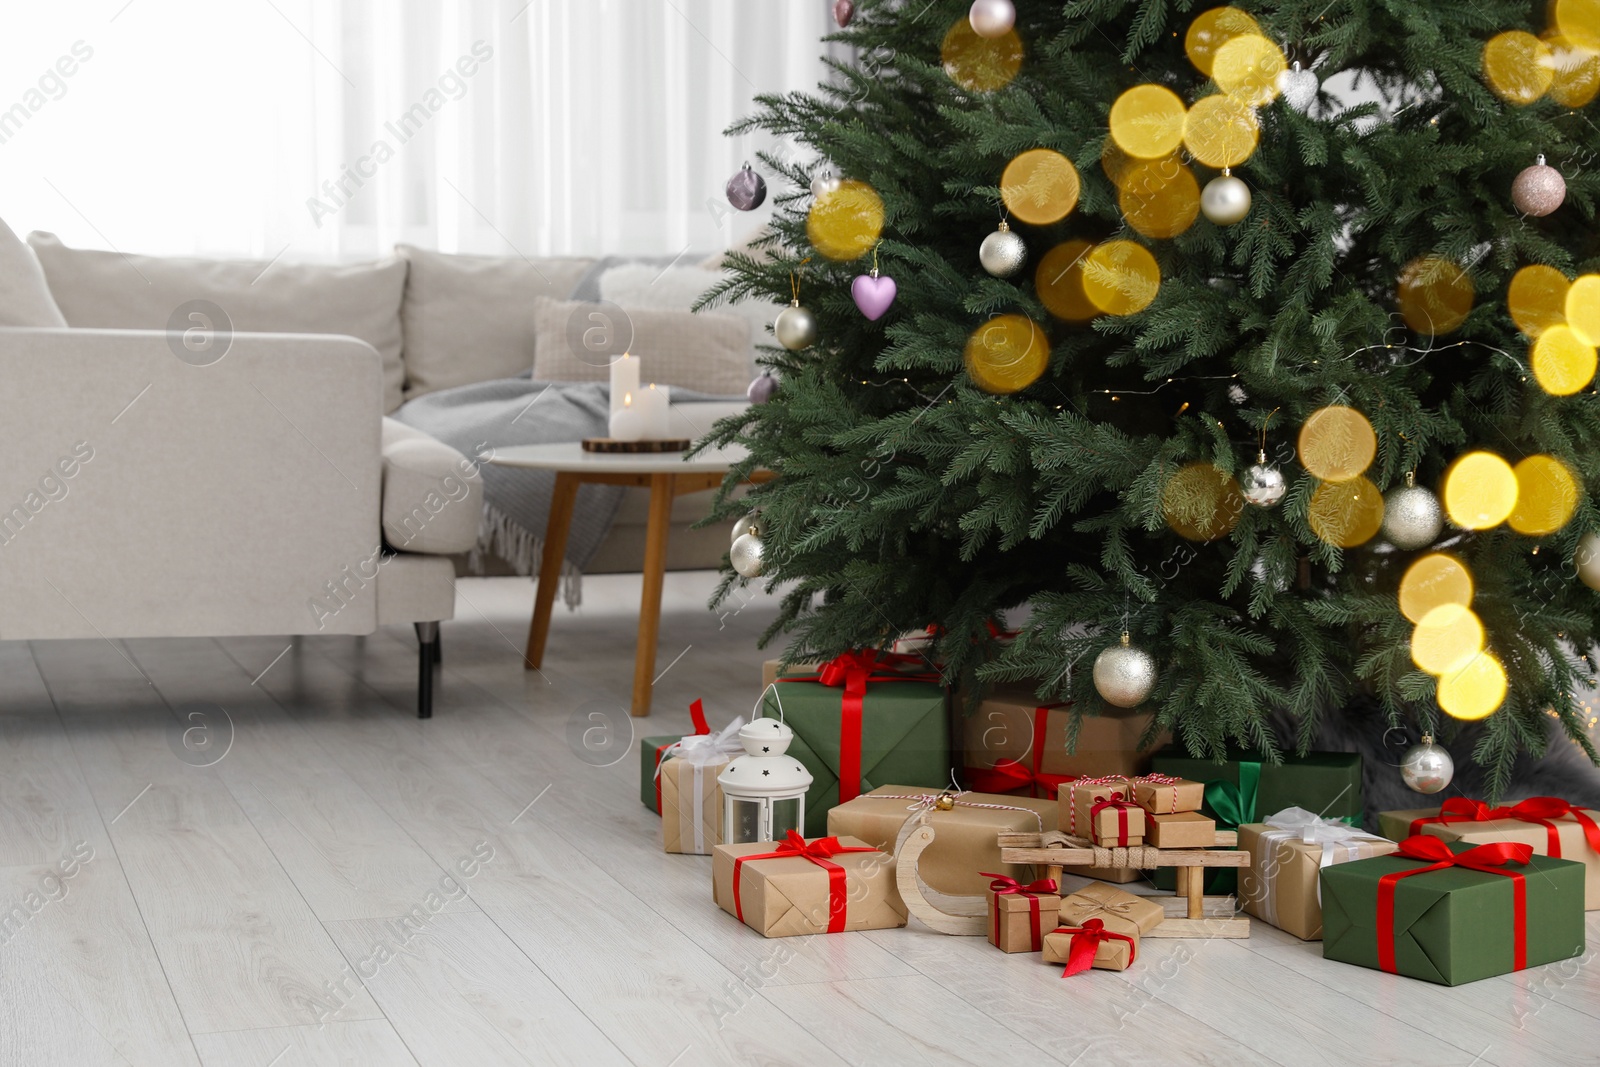 Photo of Beautifully wrapped gift boxes, wooden sleigh and lantern under Christmas tree in living room